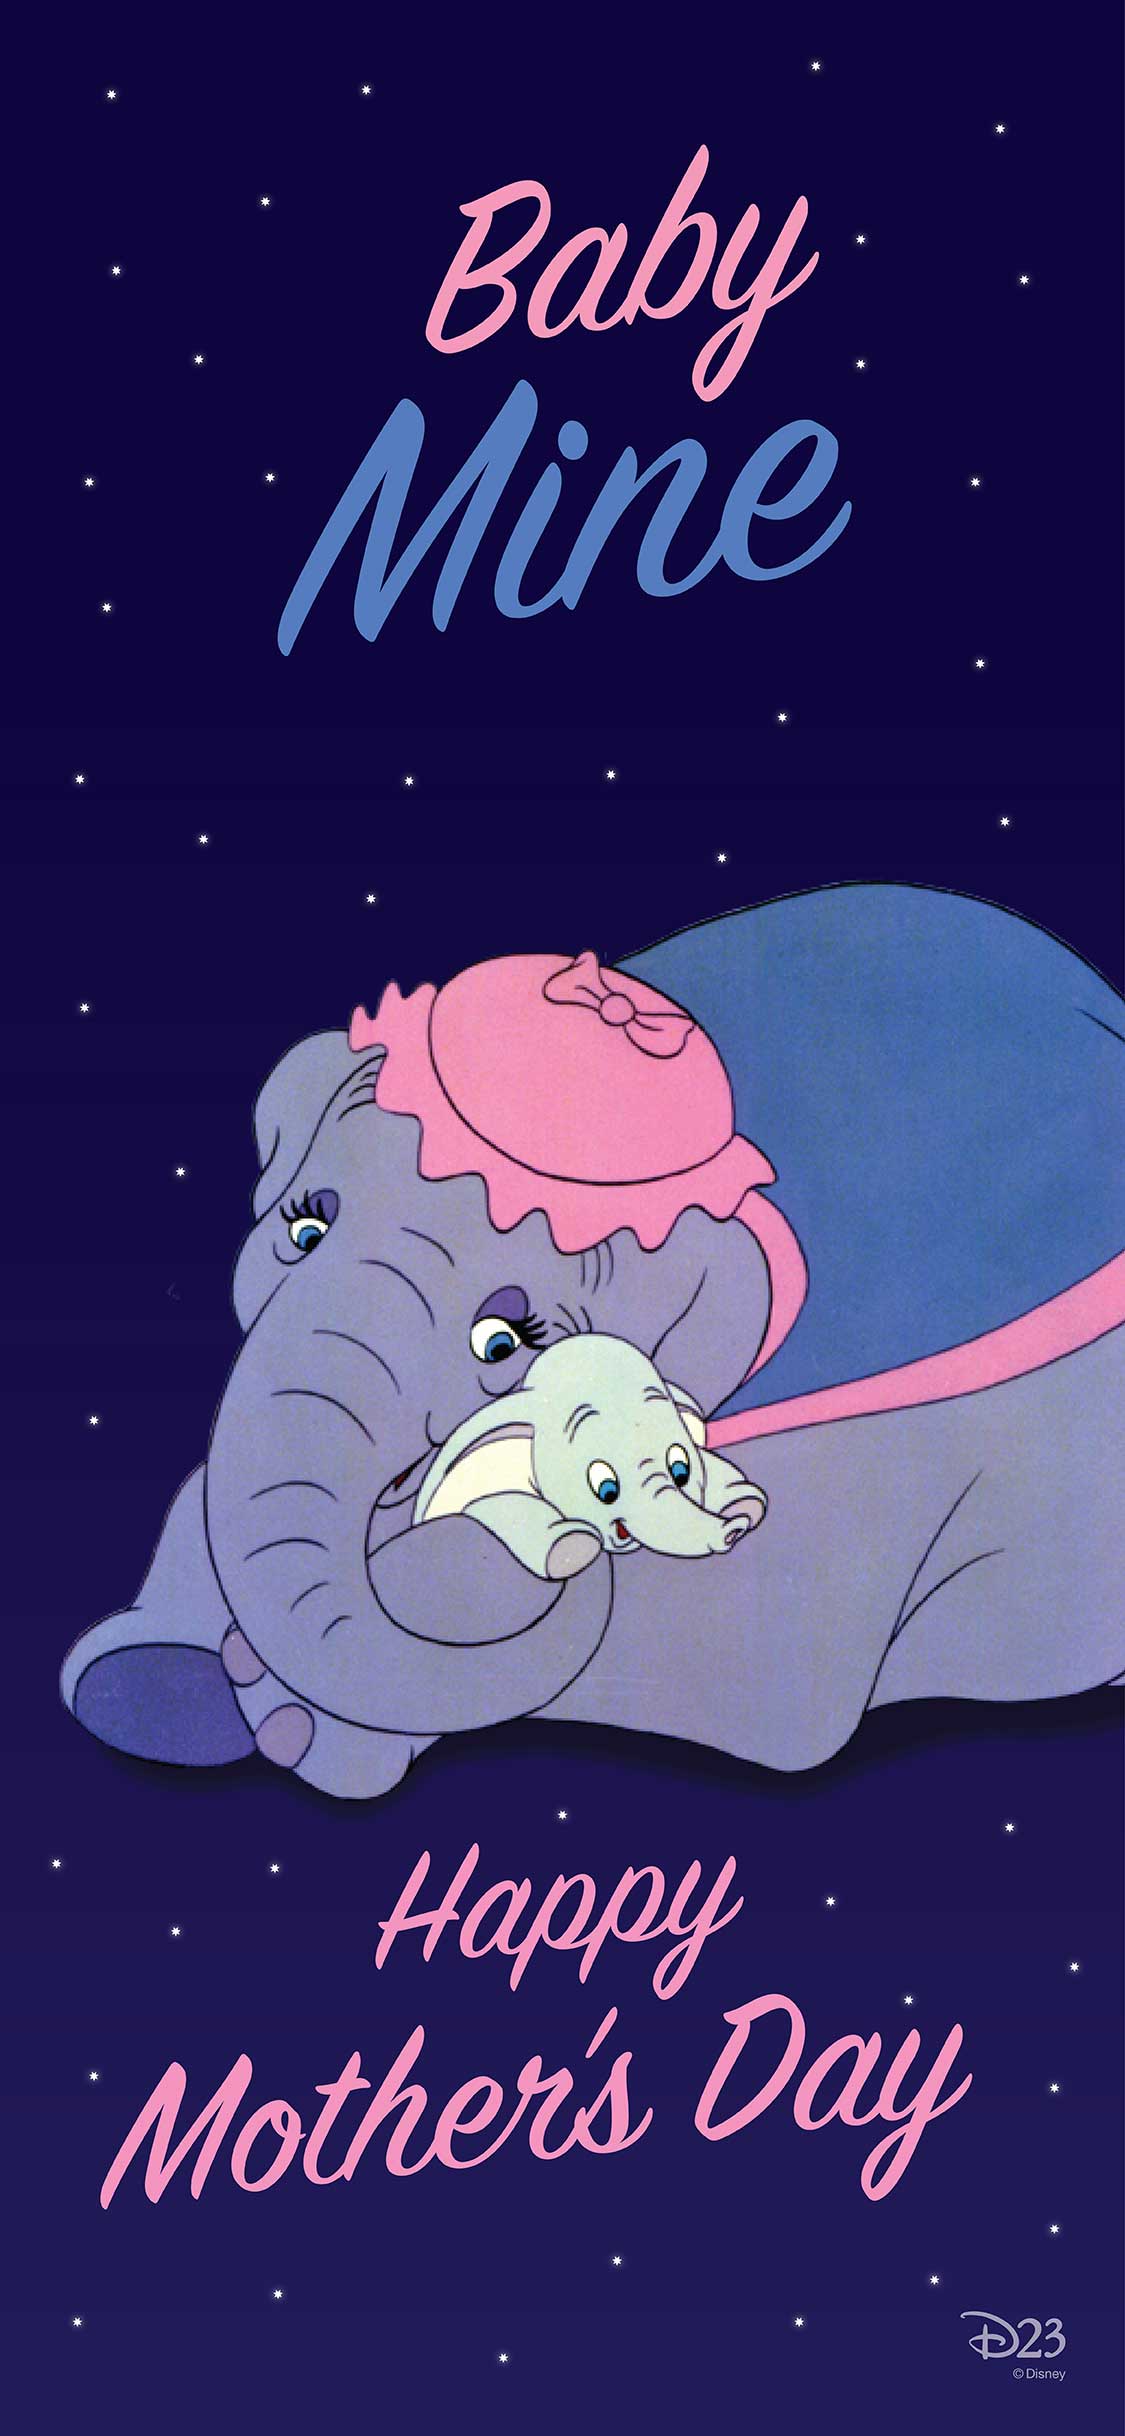 phone disney mother mothers wallpapers moms iphone backgrounds dumbo celebrate inspired elephant d23 happy cell